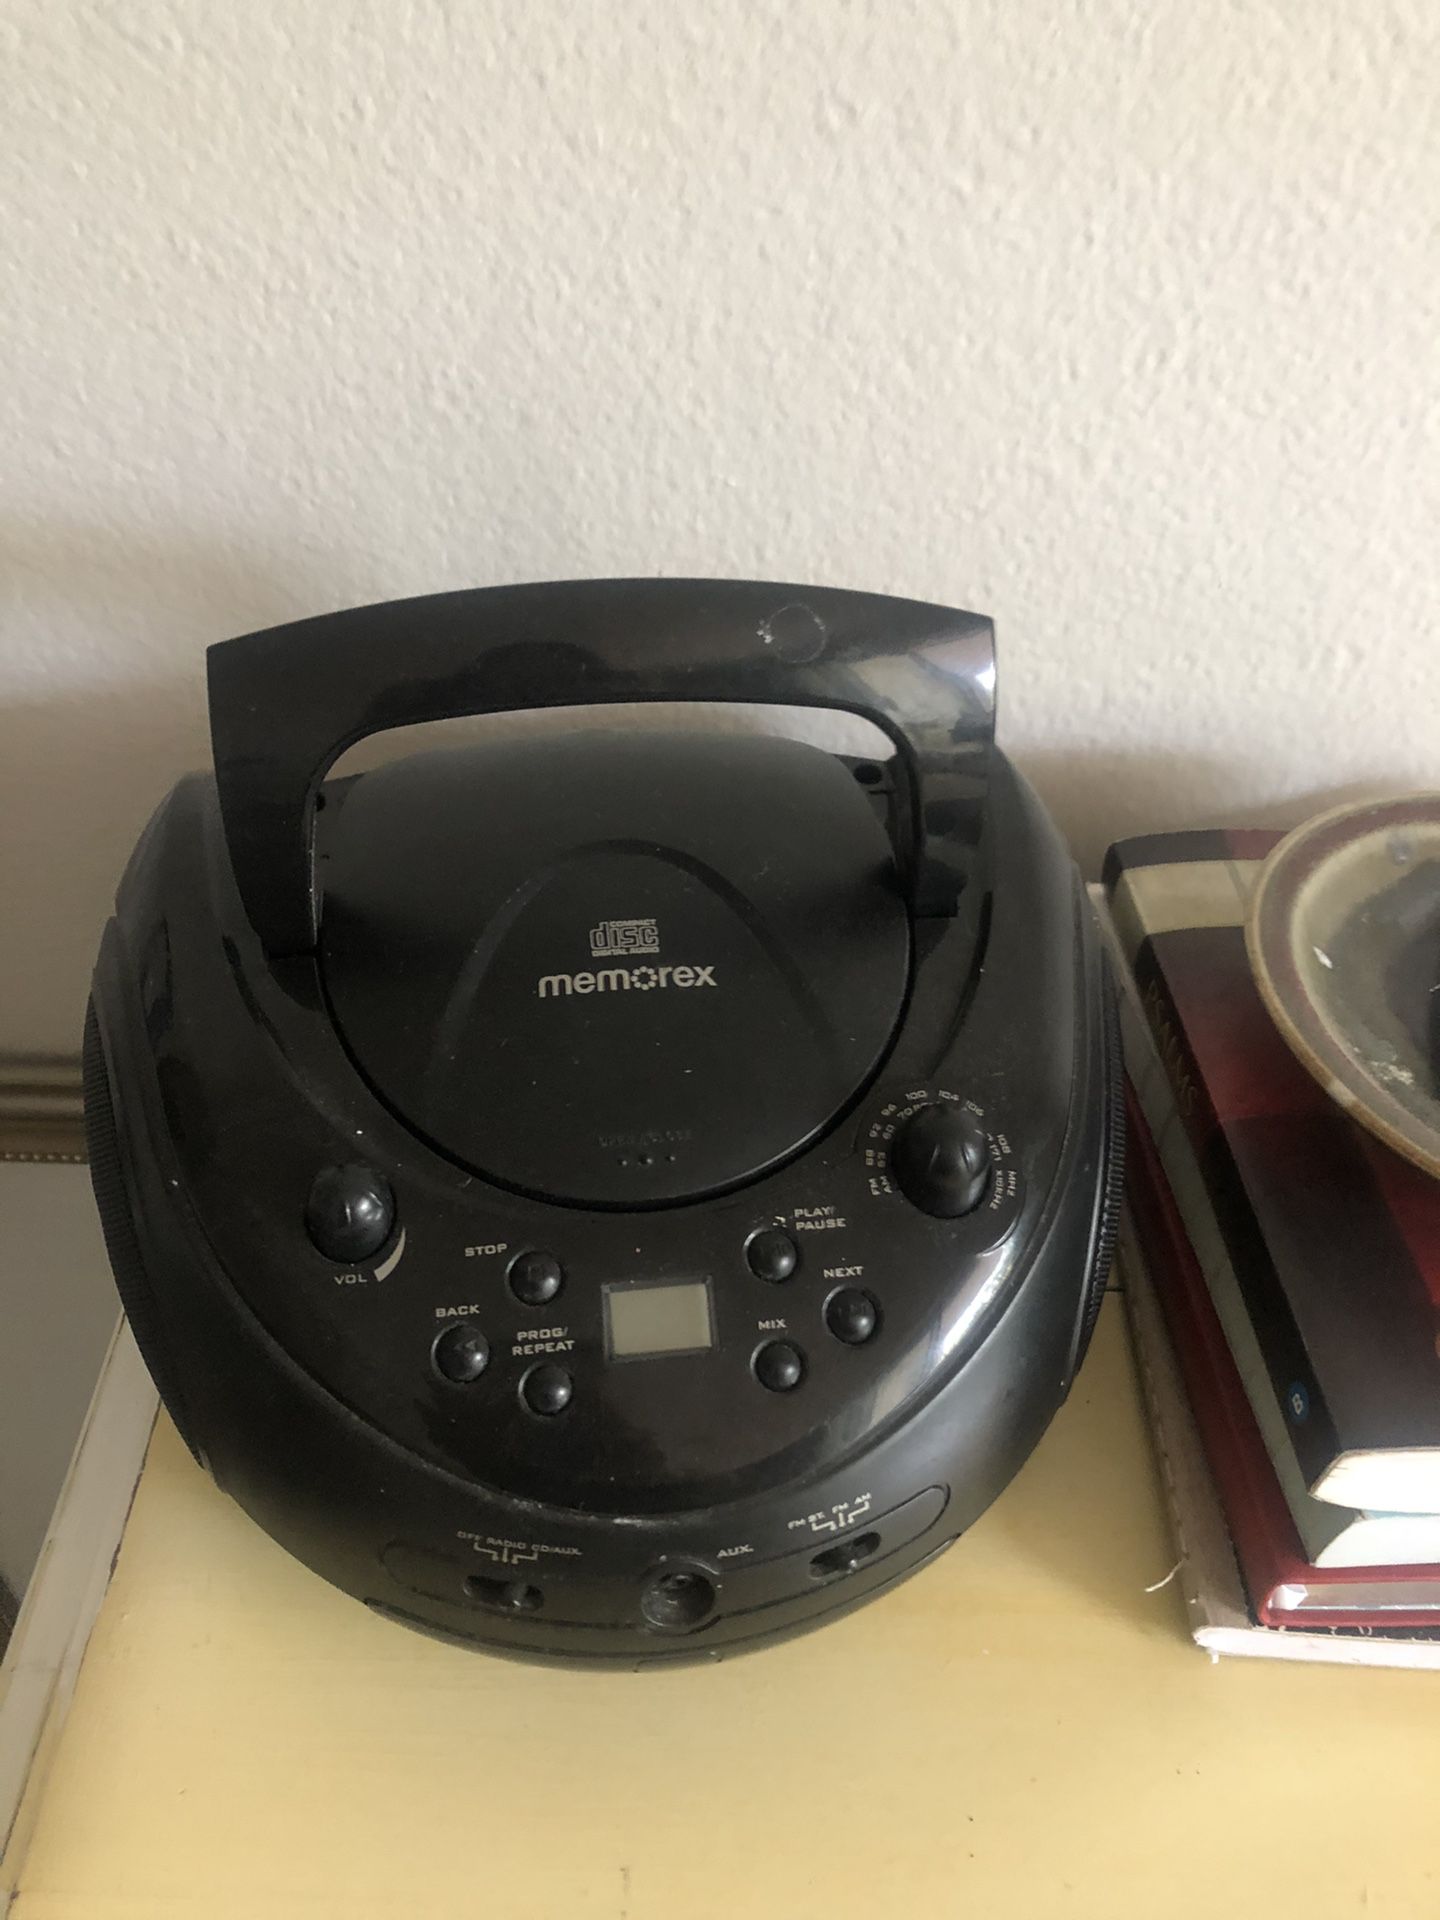 Free CD player for the parts